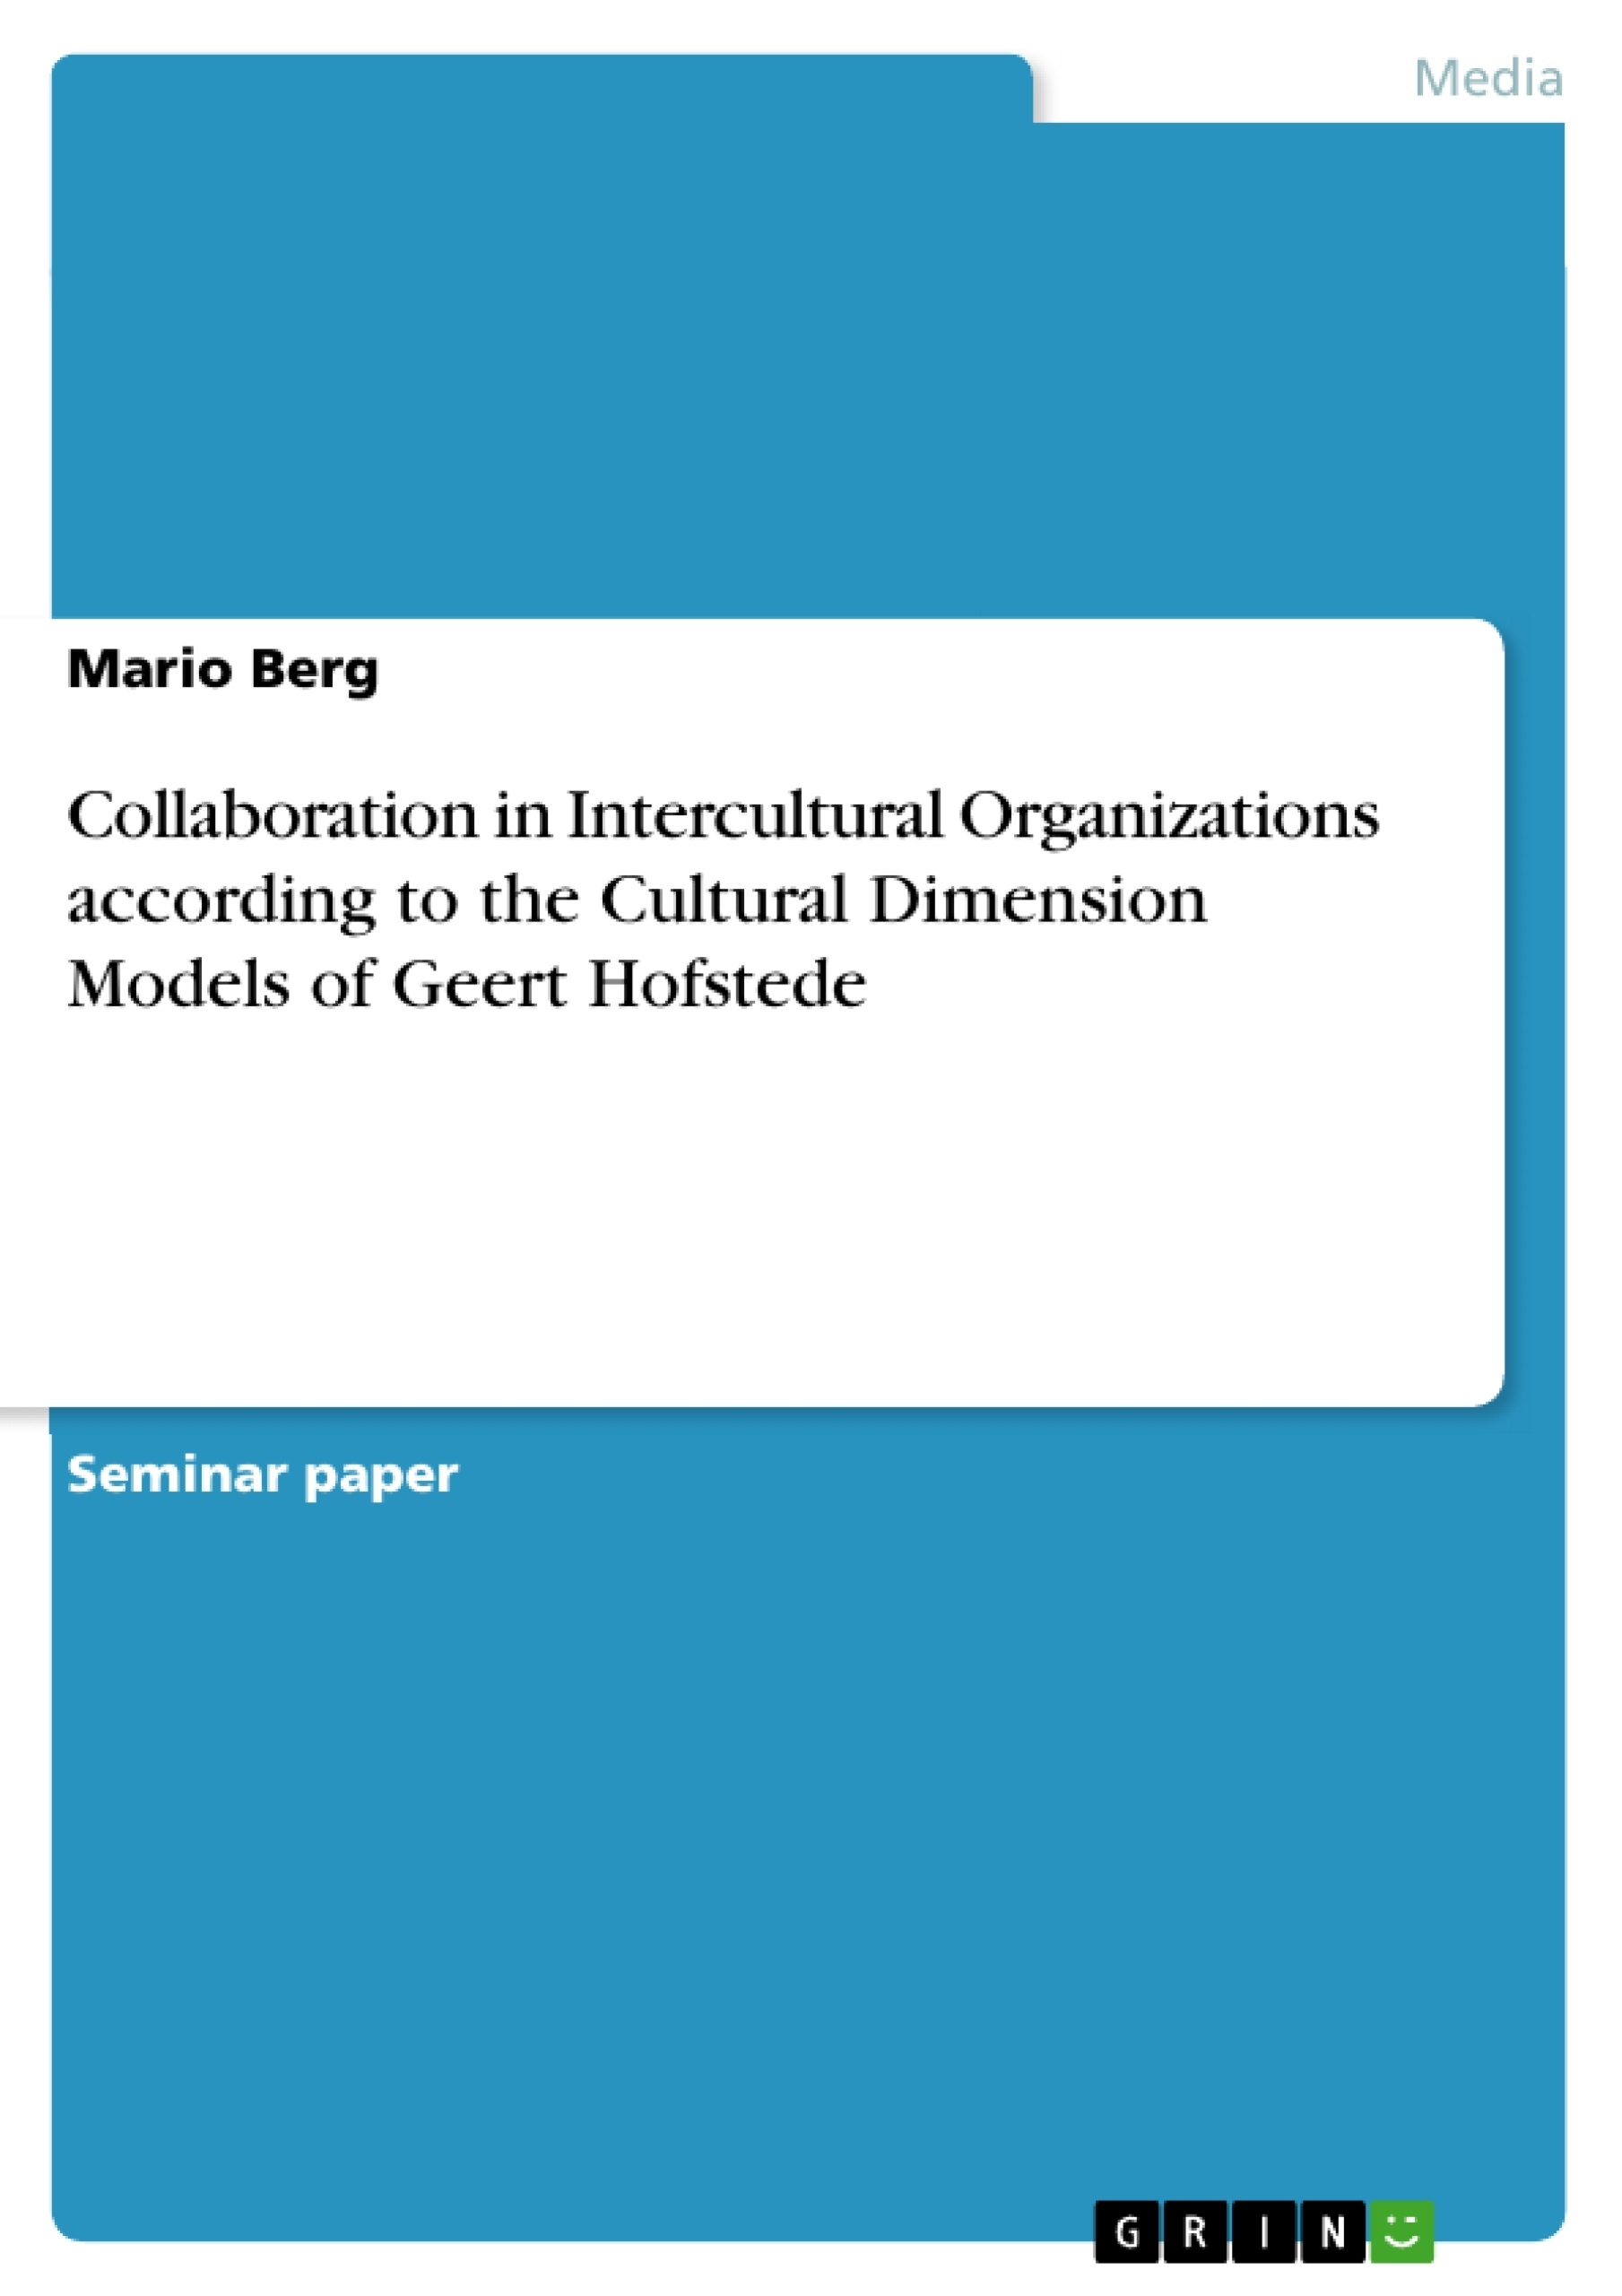 Title: Collaboration in Intercultural Organizations according to the Cultural Dimension Models of Geert Hofstede